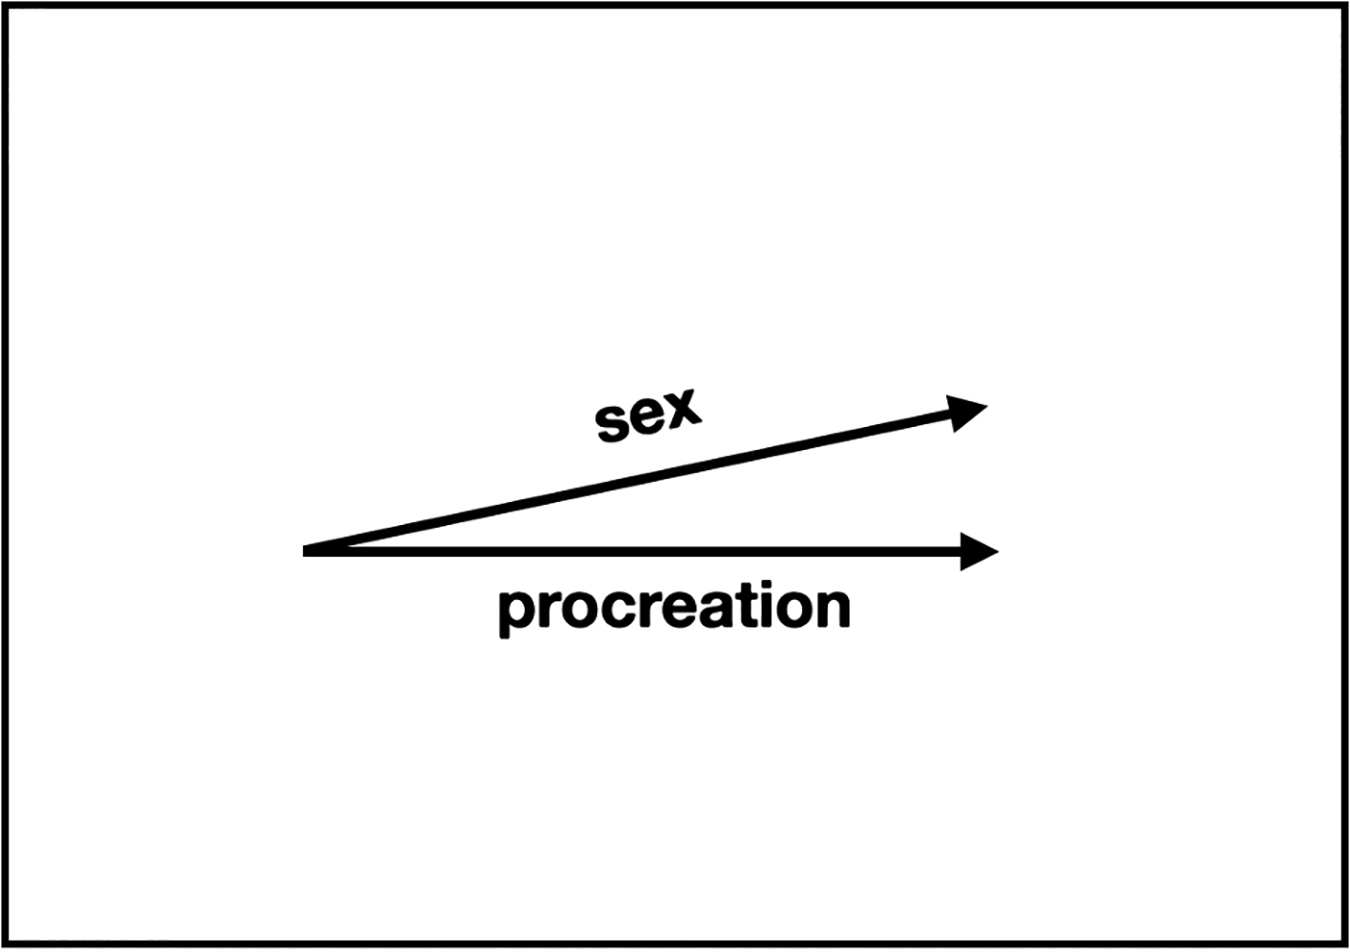 Sex and procreation represented as correlated vectors. Figure redrawn by author from presentation by David Huron (2011).